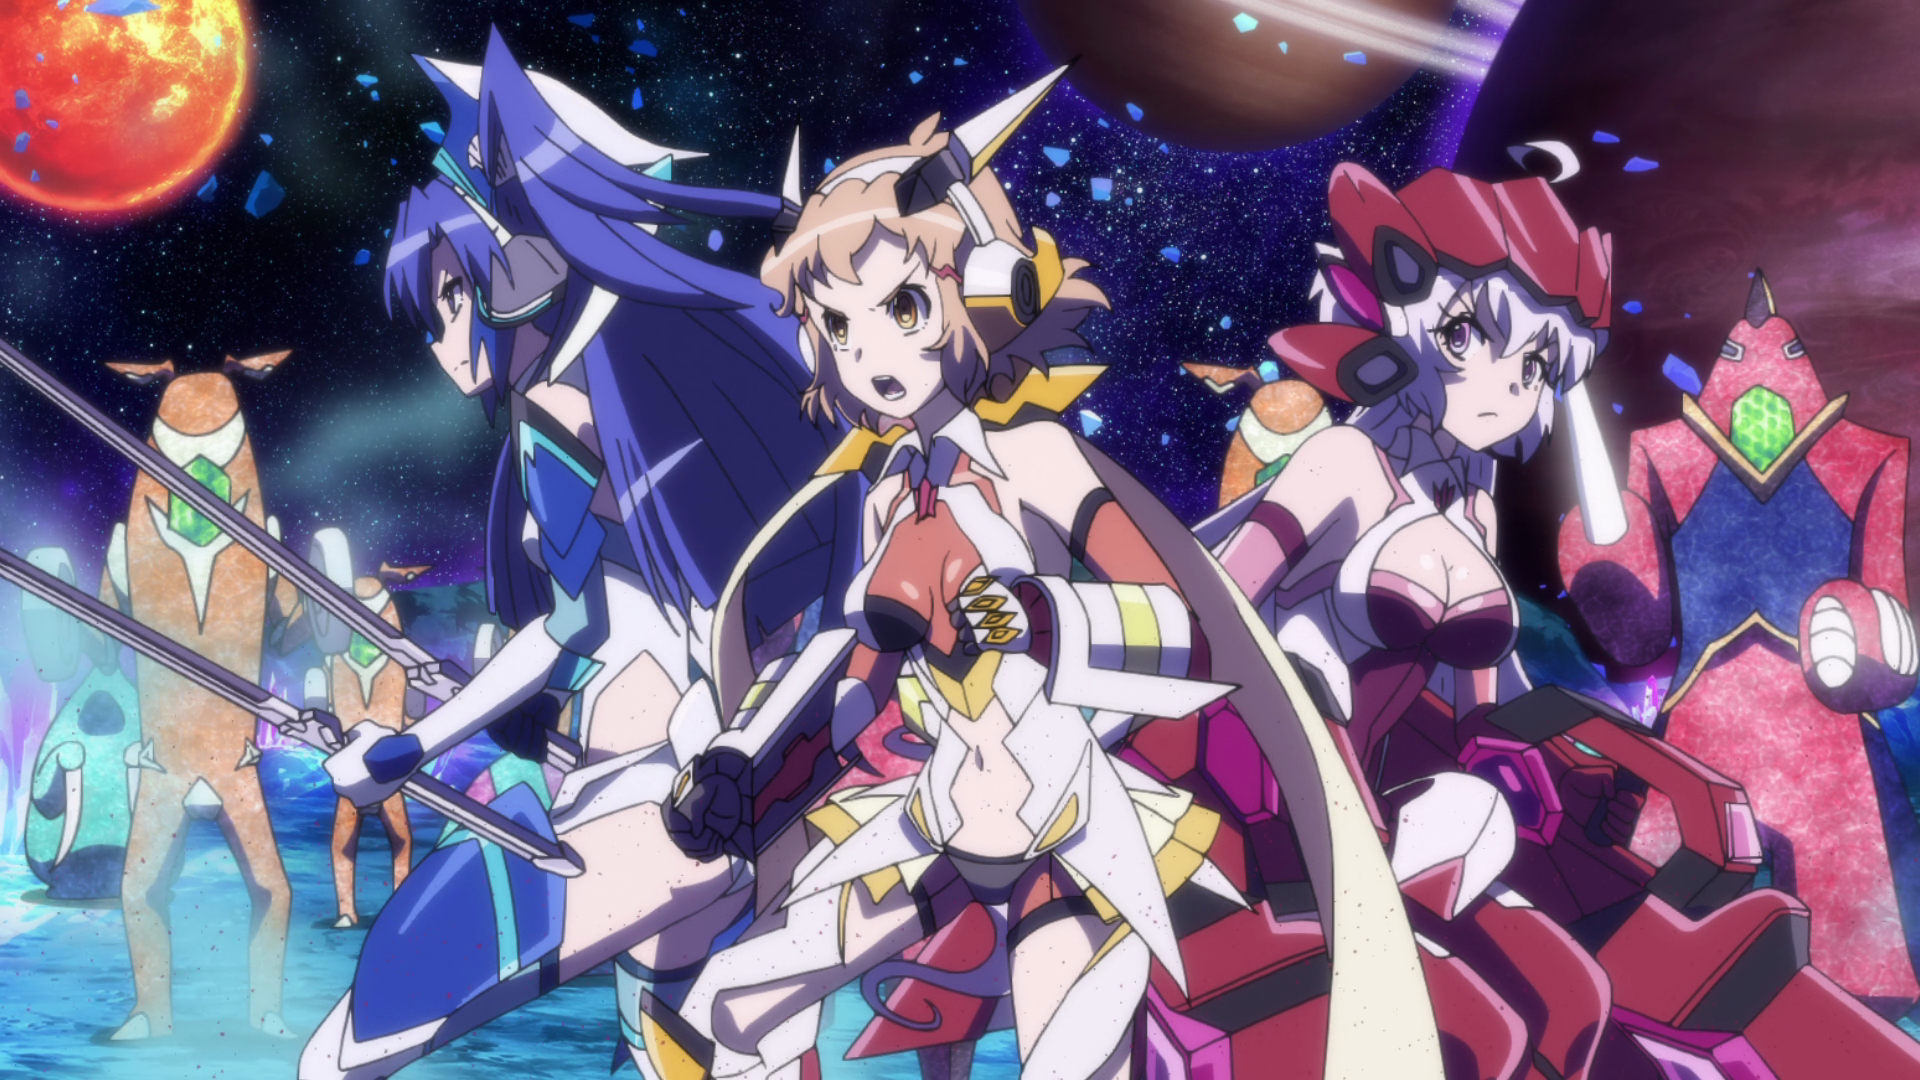 TV Anime Symphogear Season 5 Delayed! Will now Air in July 2019 - TheNerdMag